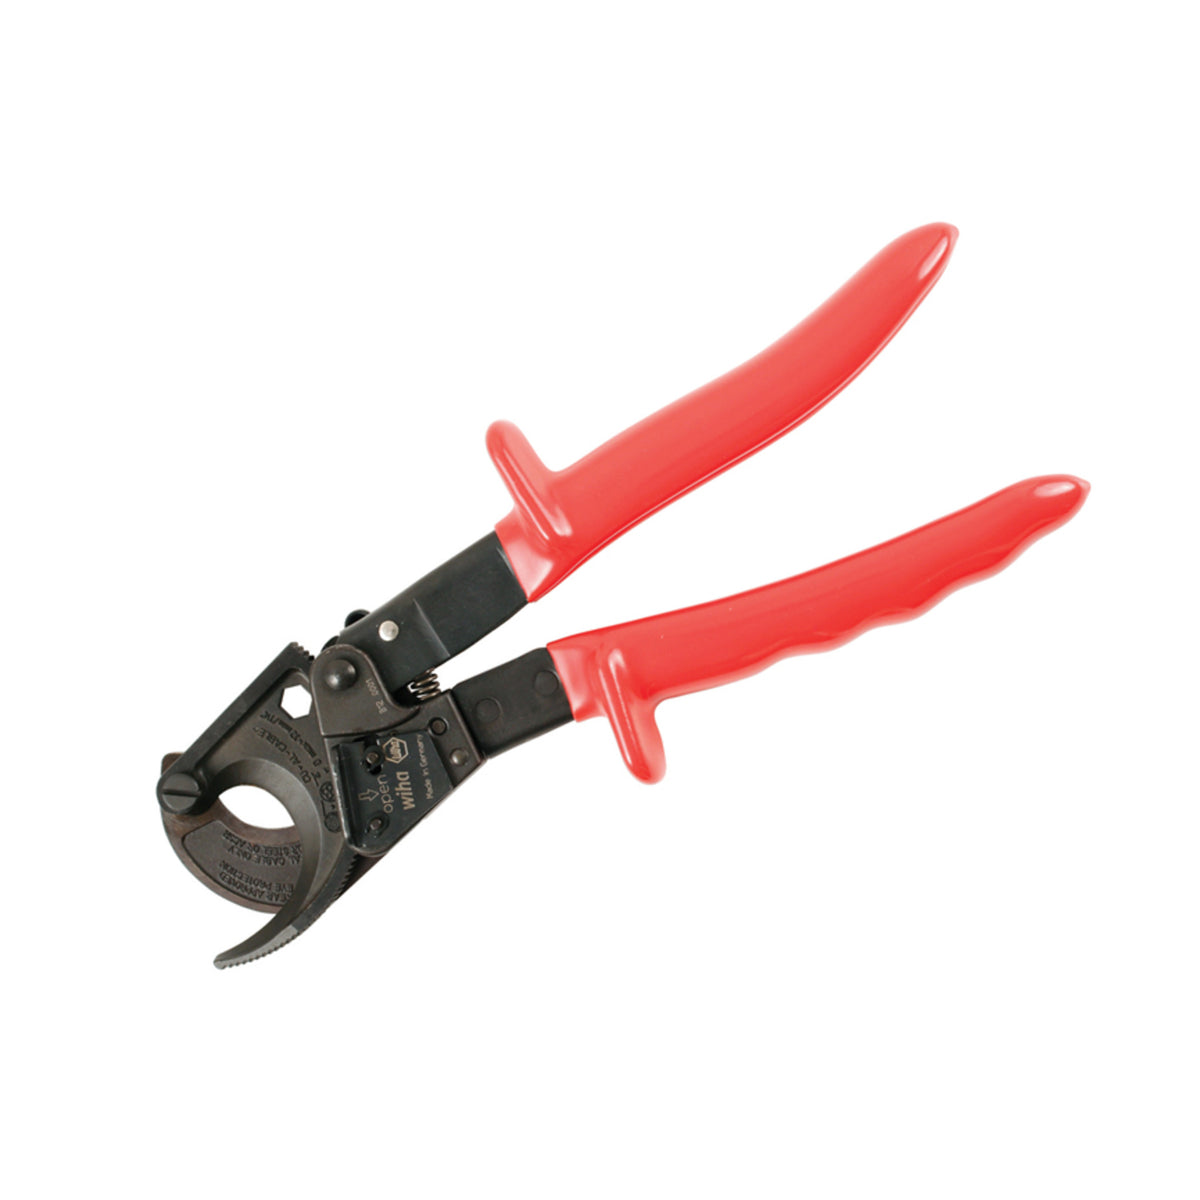 Wiha 11960 Insulated Ratcheting Cable Cutters 10"